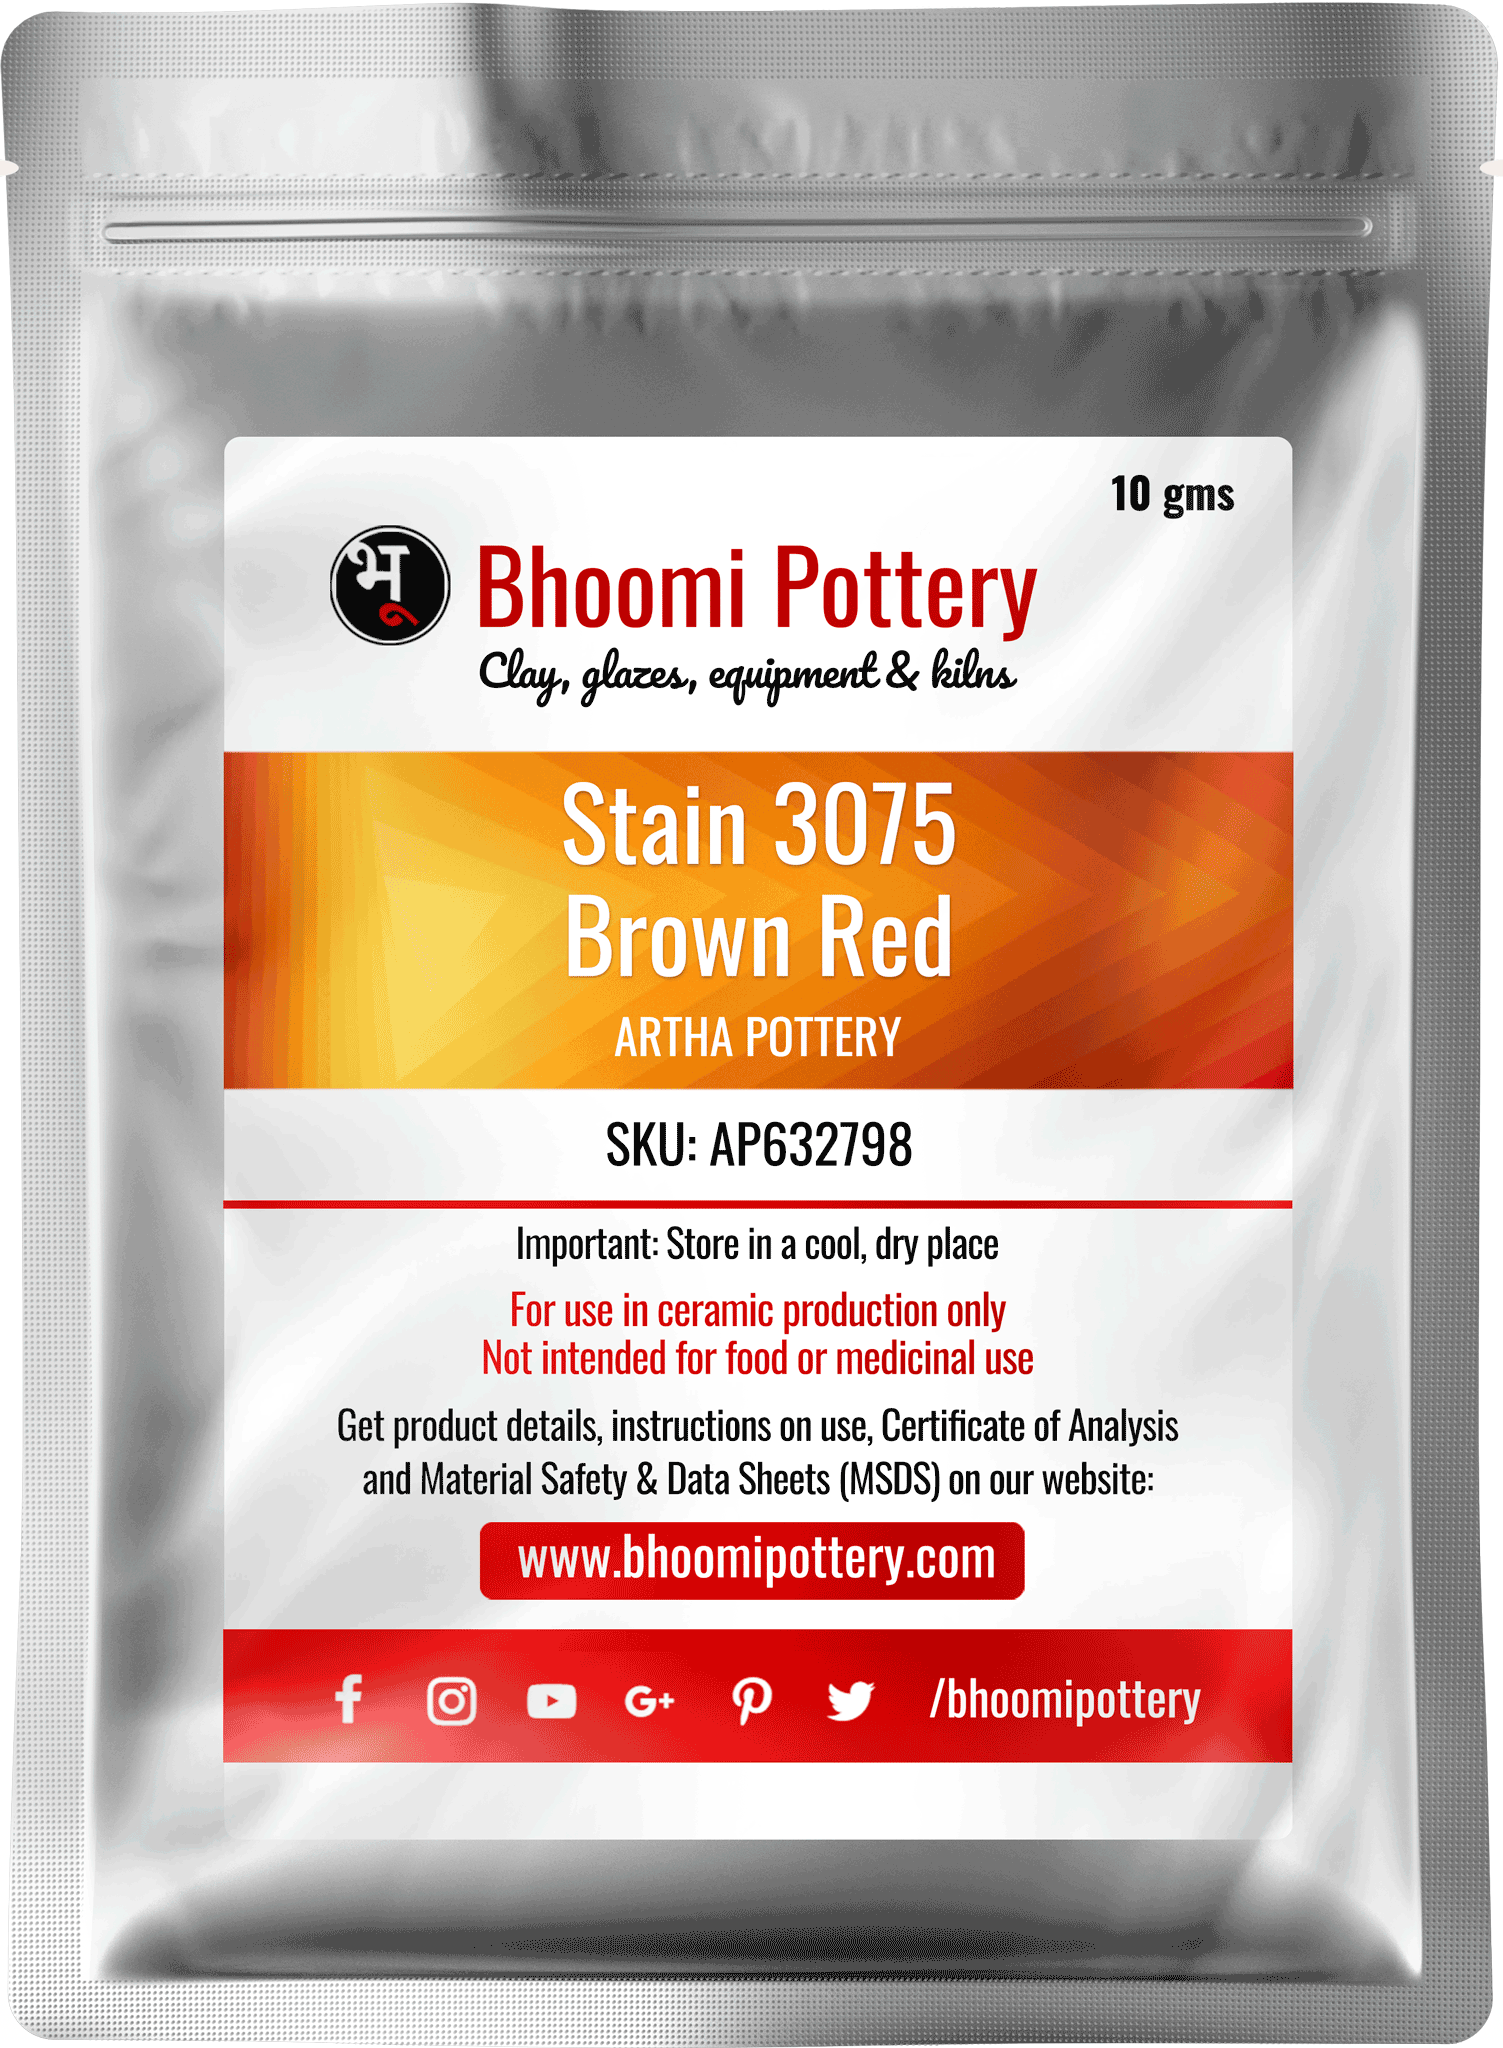 Artha Pottery Stain 3075 Brown Red 100 gms for sale in India - Bhoomi Pottery